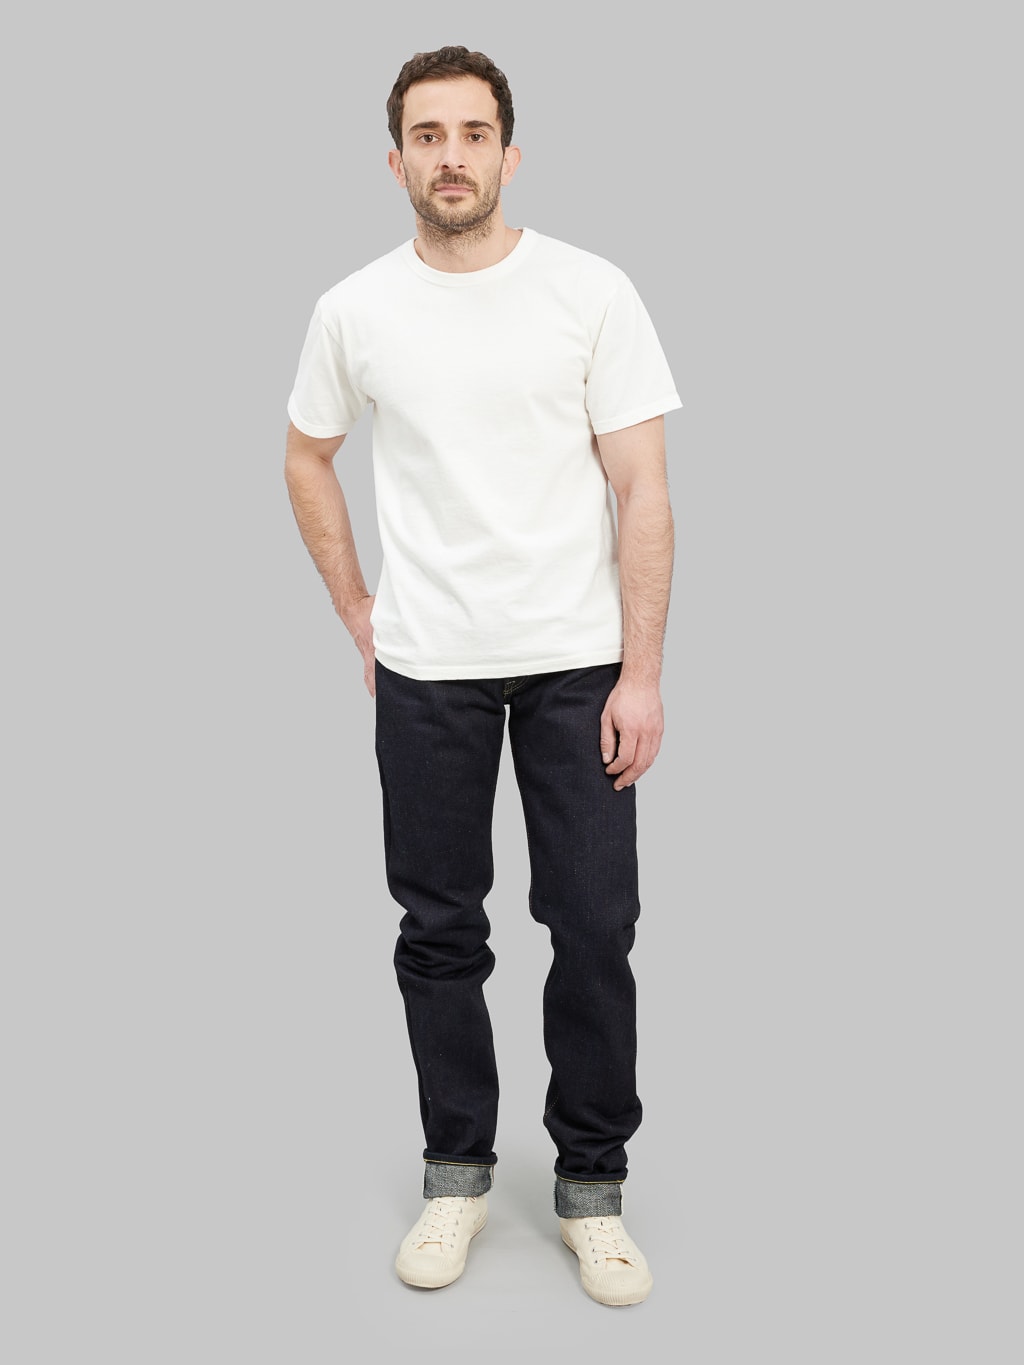 The Strike Gold 9904 24.8oz Extra Hard Straight Tapered Jeans